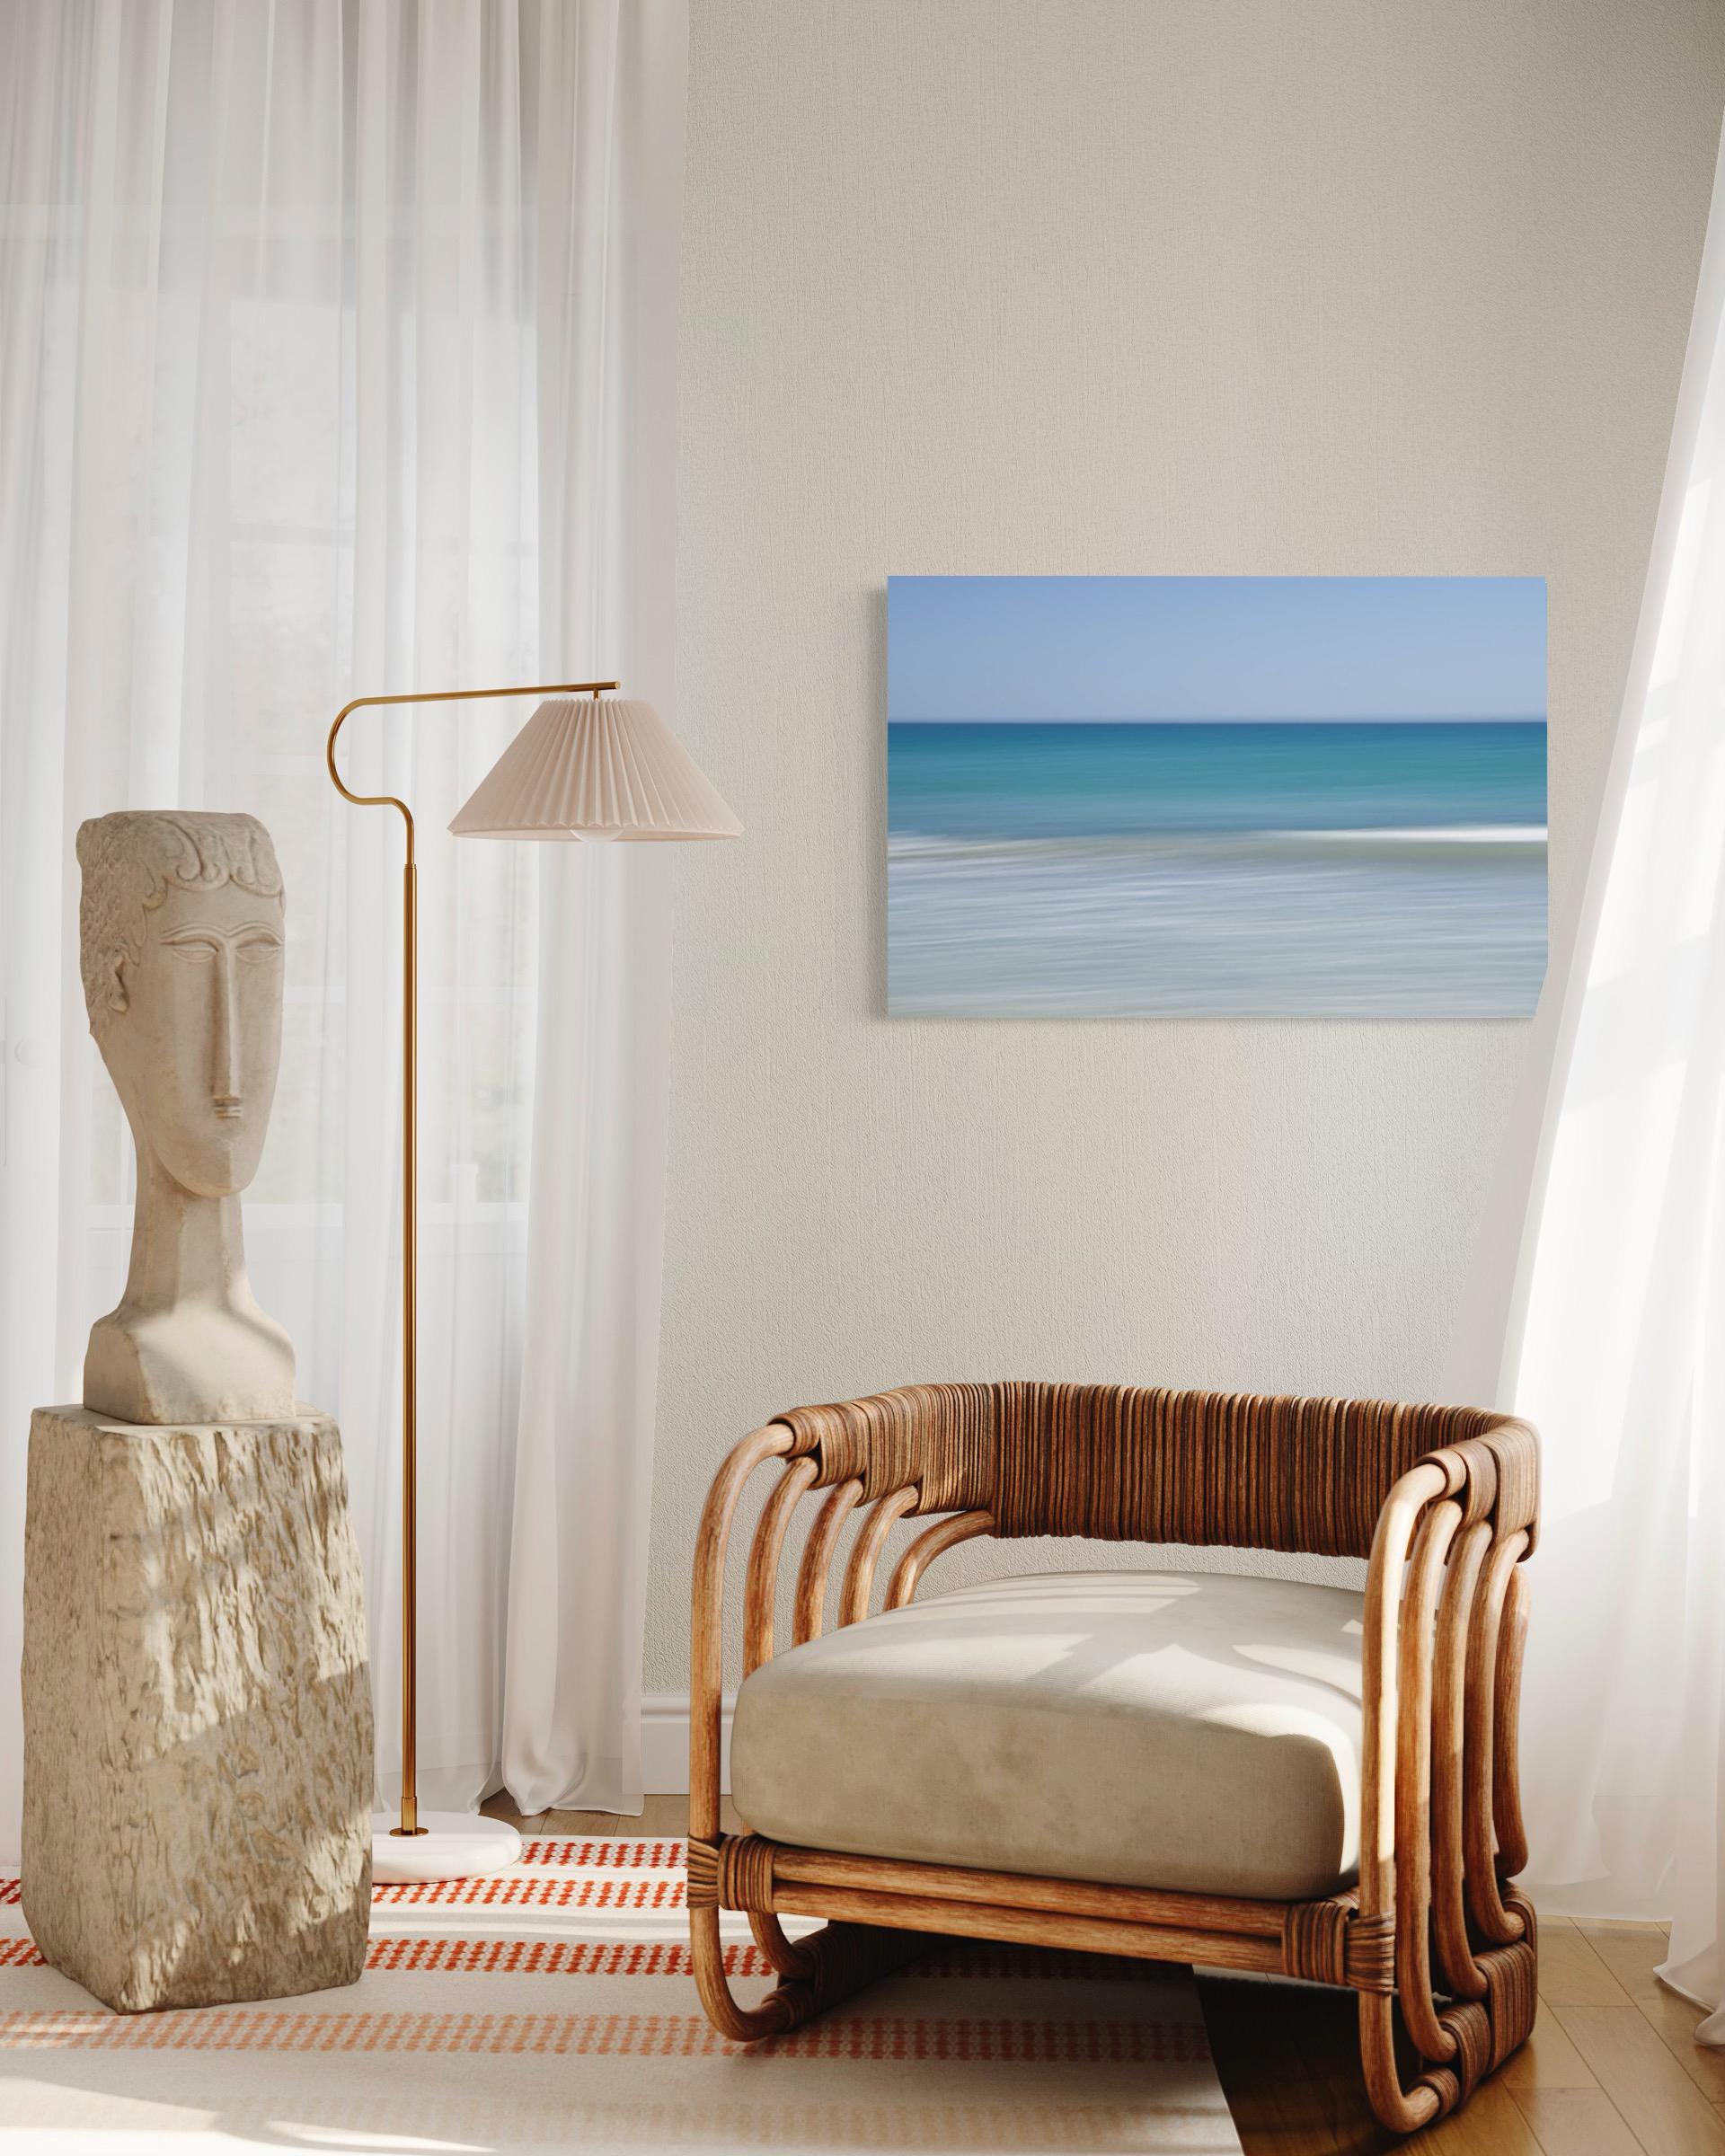 This photograph by Tori Gagne features an abstracted seascape composition and a coastal blue, turquoise, and white palette. An edition size of 25, this photograph is available as a metal sublimation print with a 1.3” deep silver flush mount frame